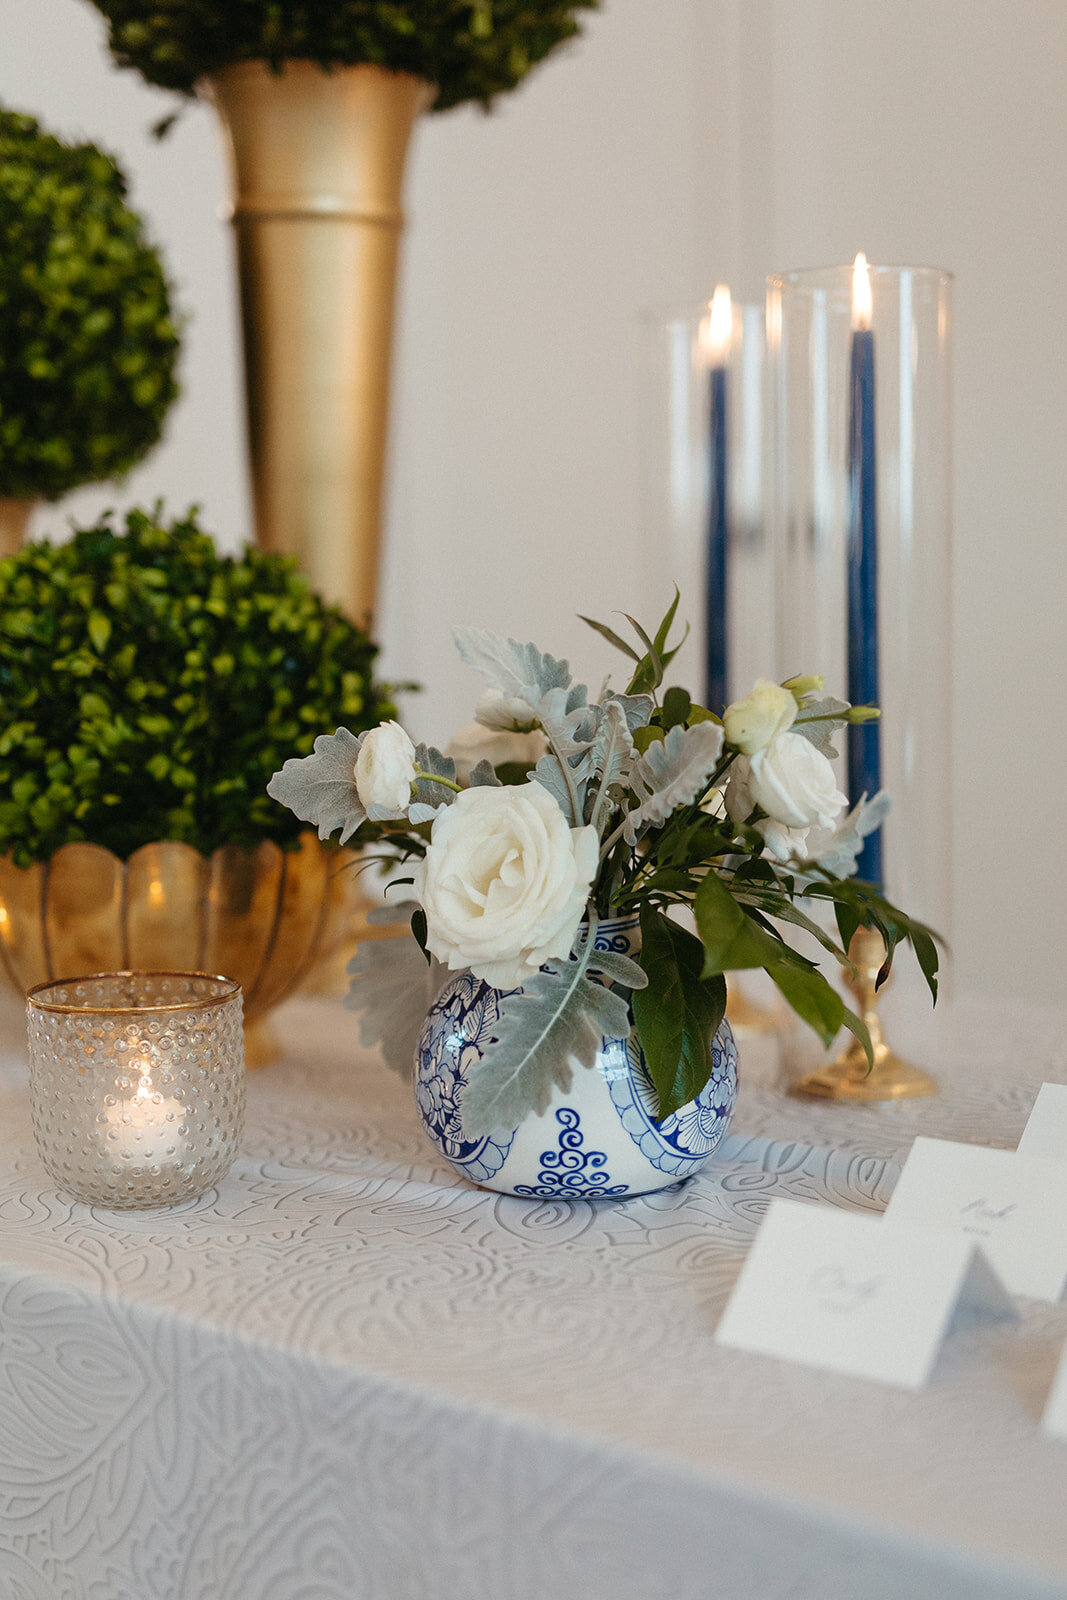 Flower arrangement in blue and white vase with candles and white place cards atop and white linen table.